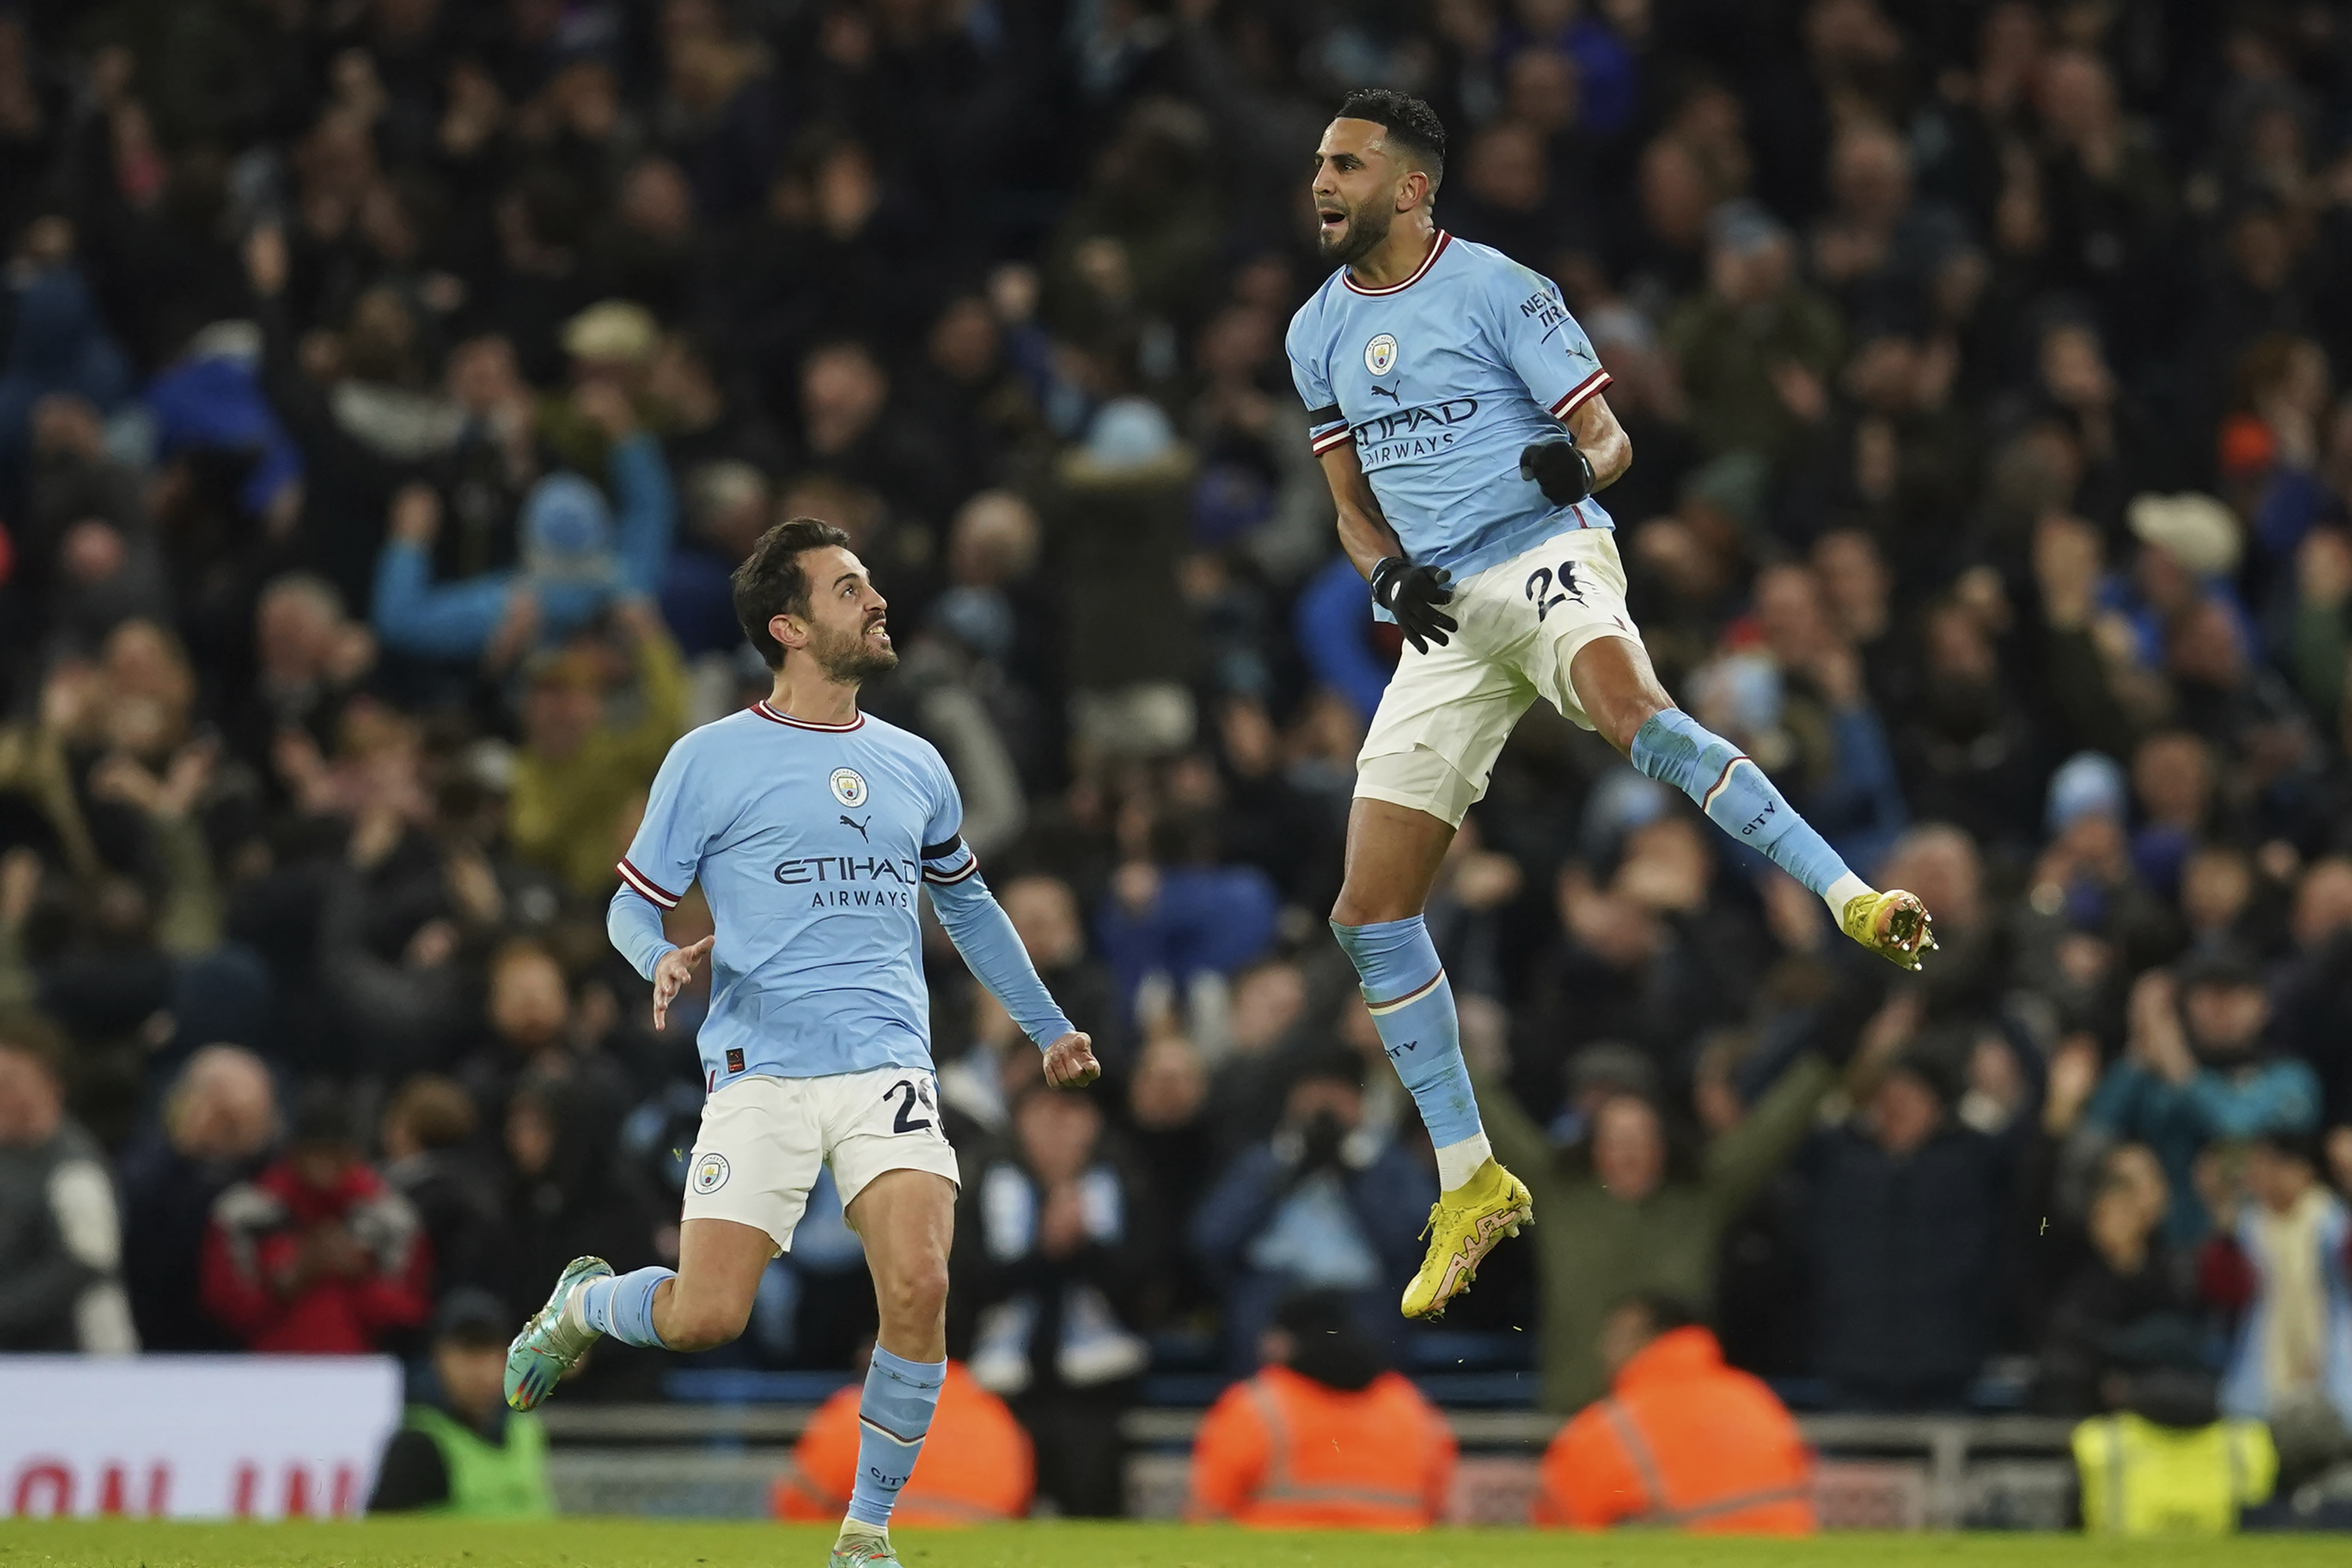 Manchester Derby Free live stream, TV, how to watch City vs